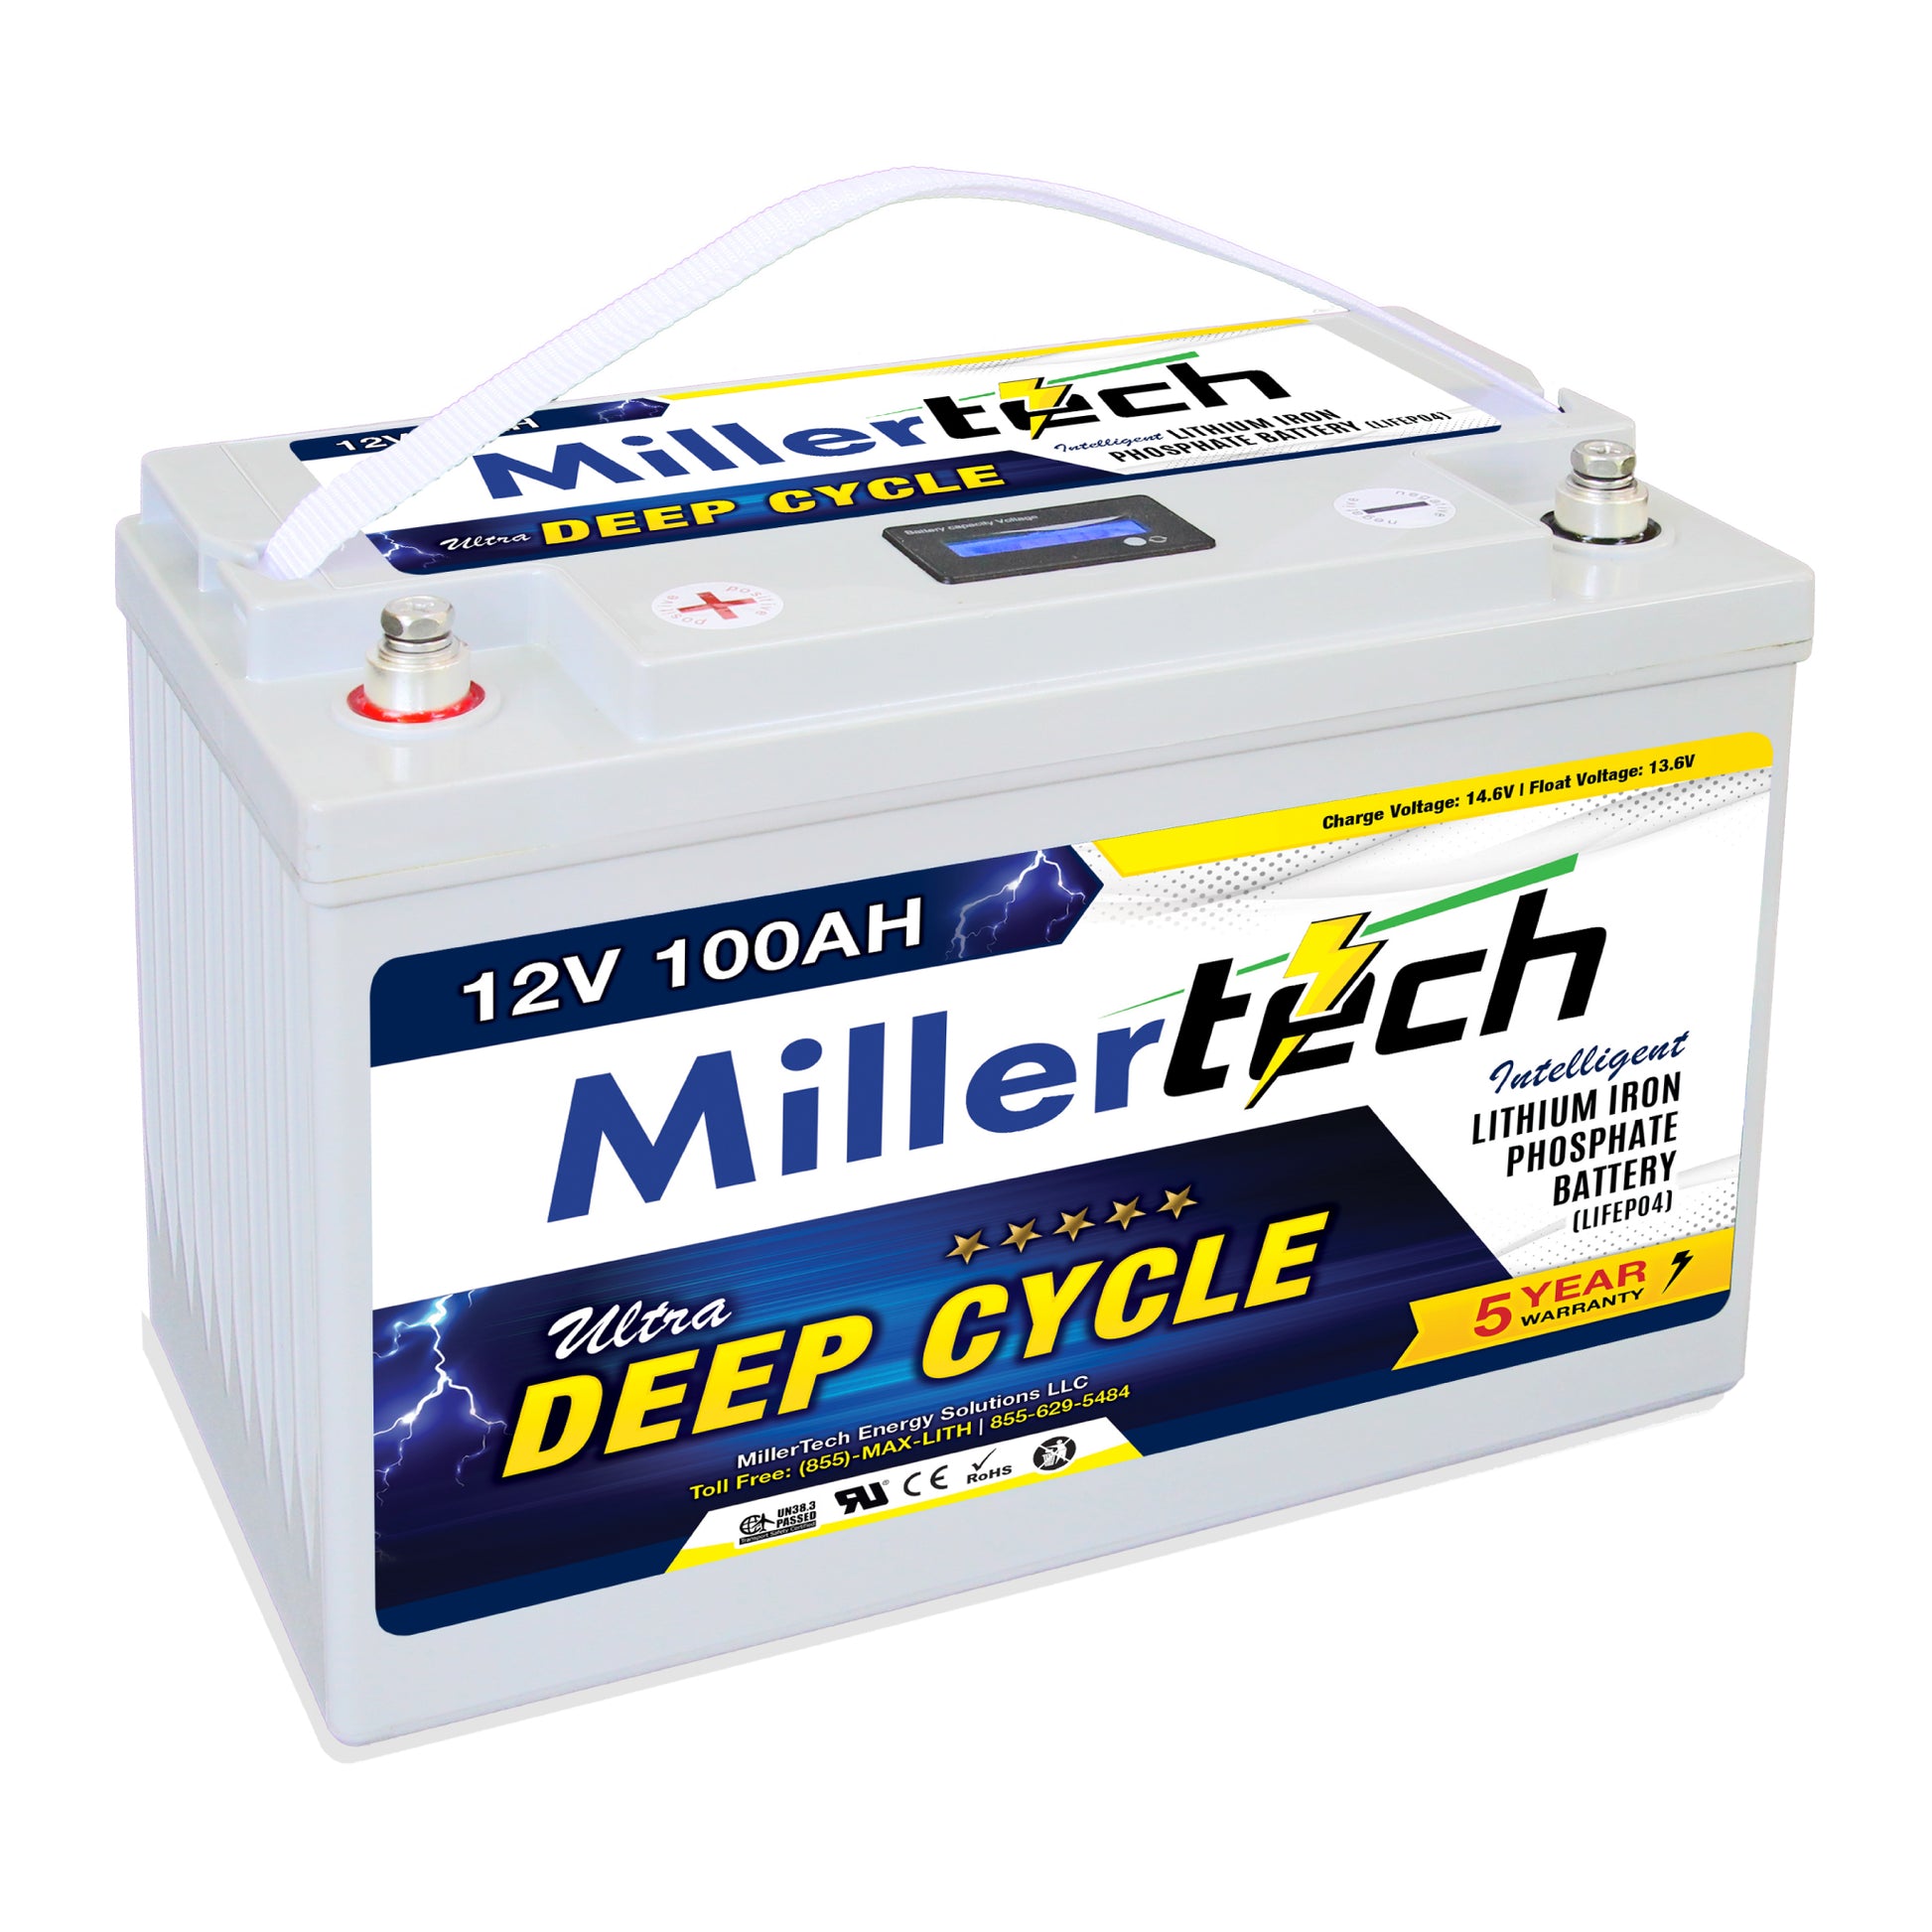 MillerTech 12100L 12V 100Ah Lithium Iron Phosphate Deep Cycle Battery For Boat Trolling Motors, RV's, Golf Carts, Solar Systems, & Off Grid Applications